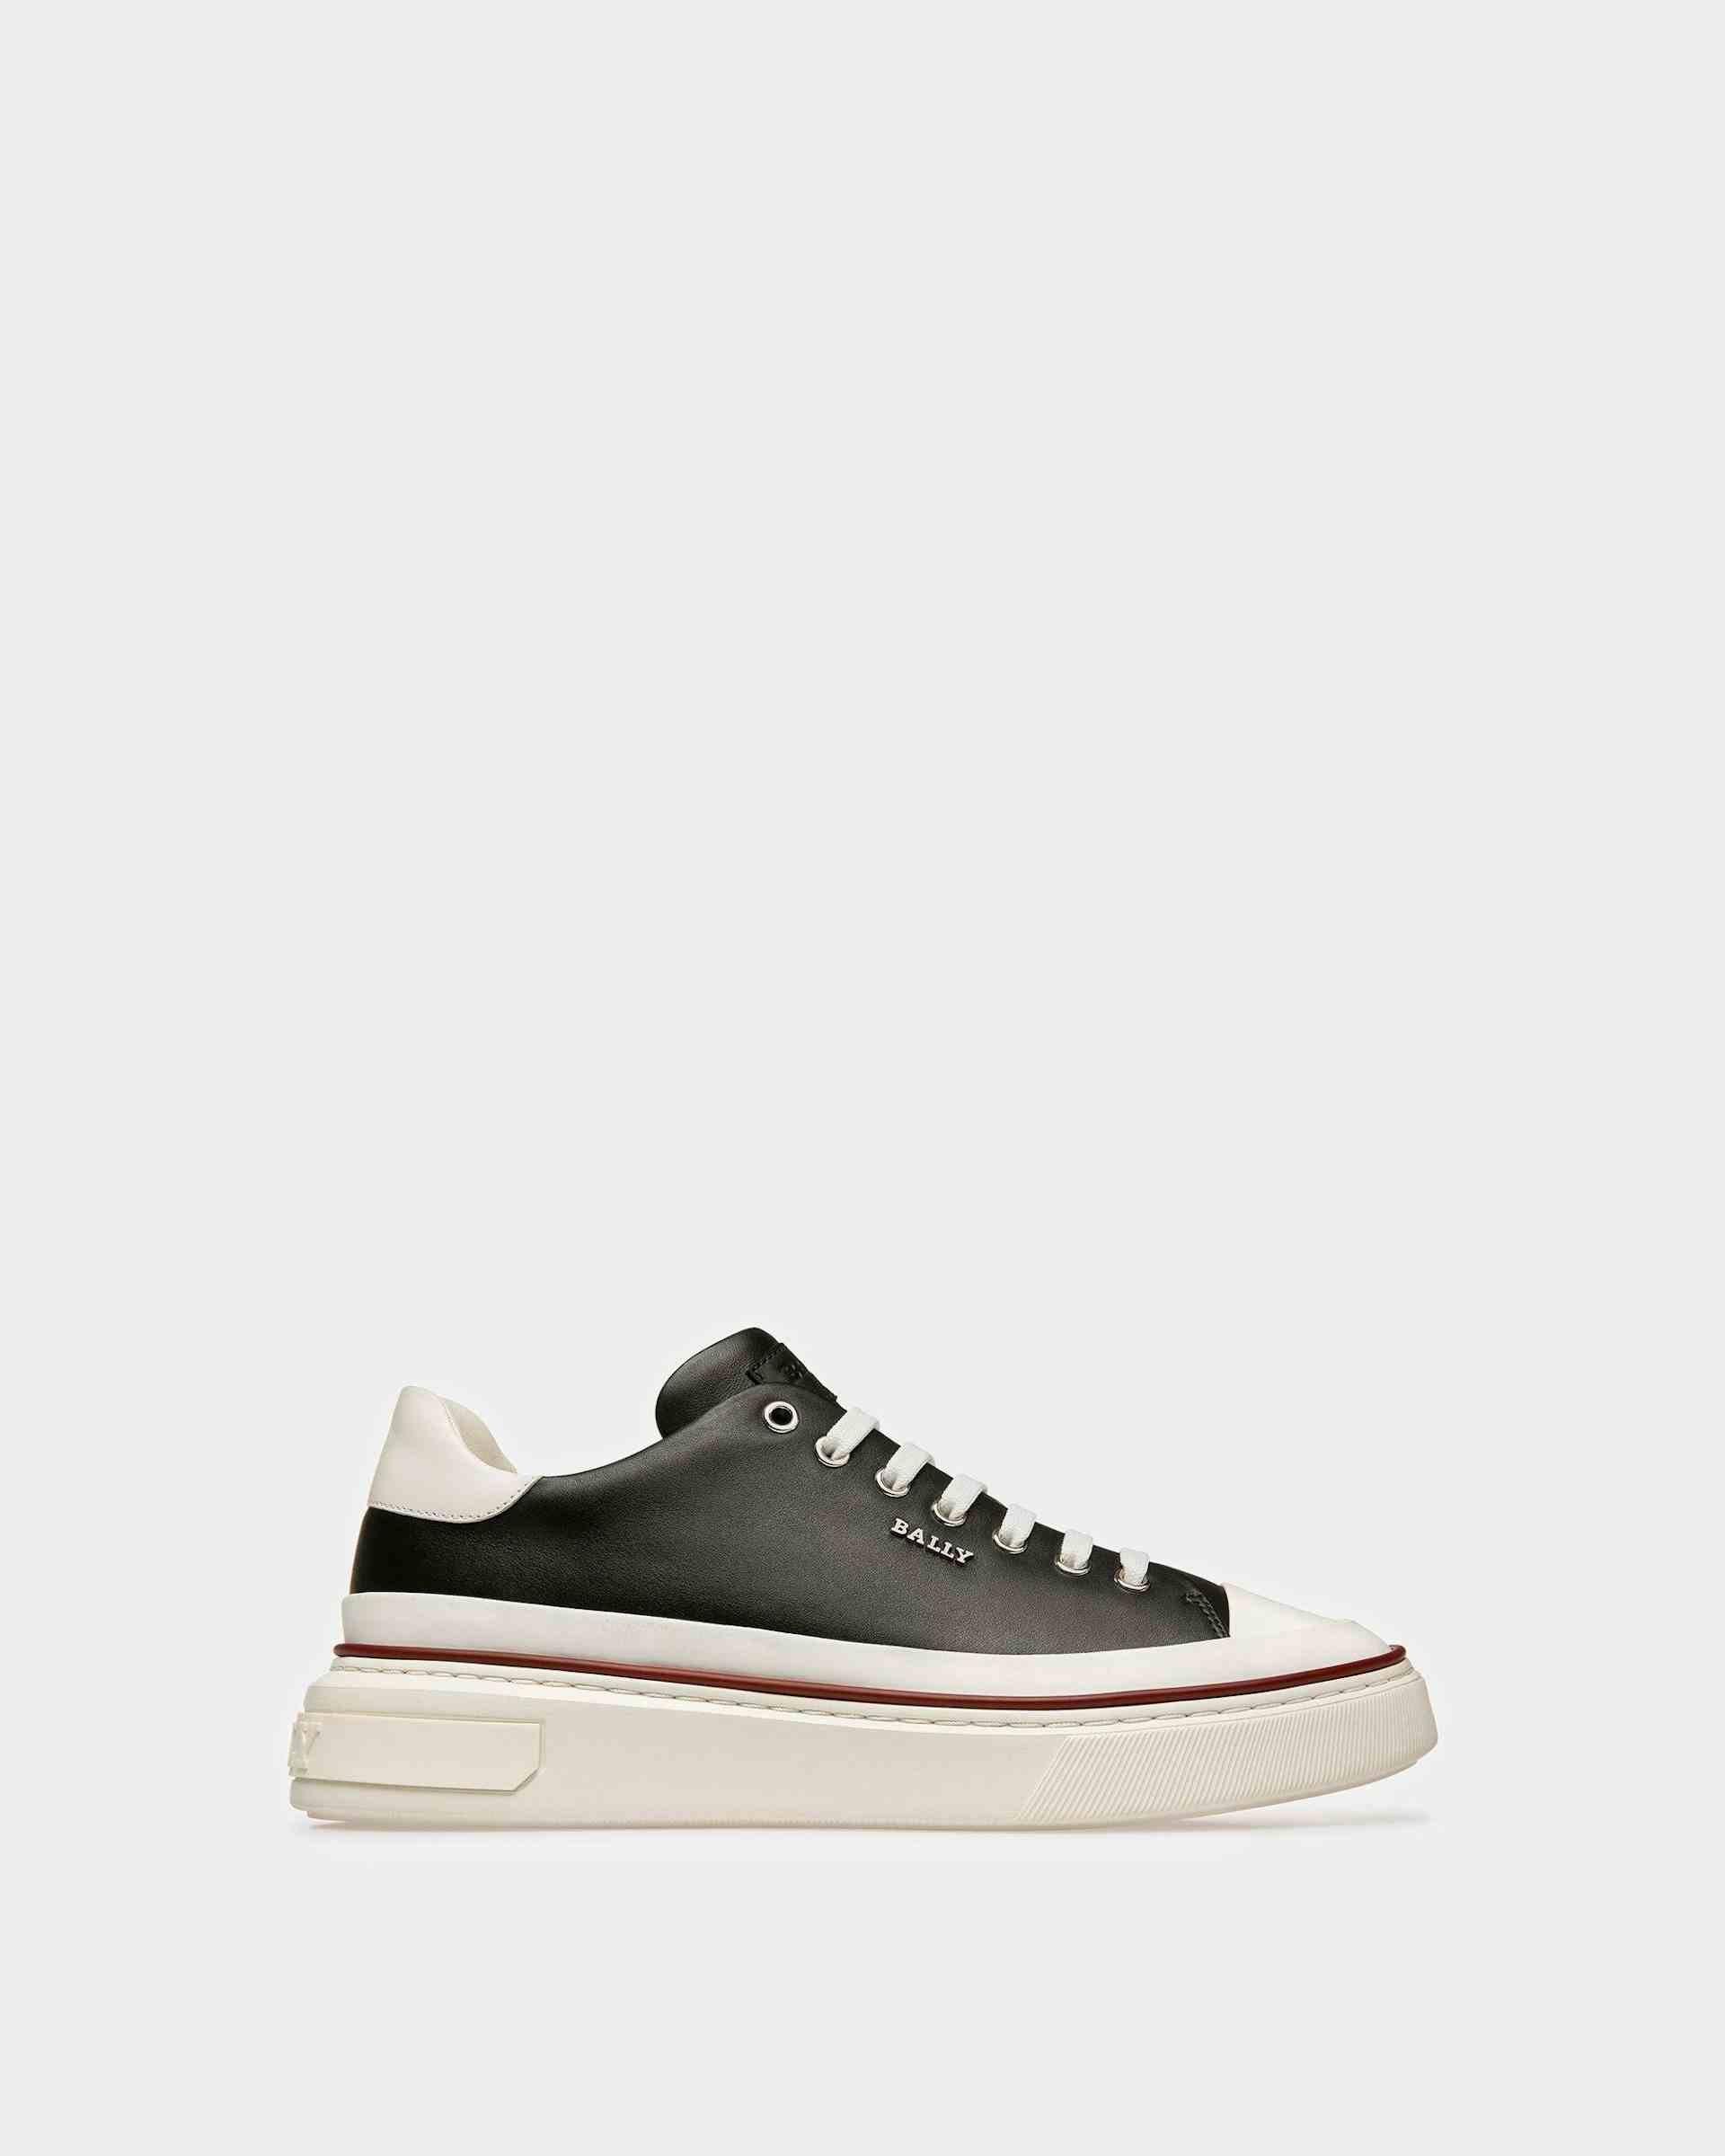 Maily Leather Sneakers In Black & White - Men's - Bally